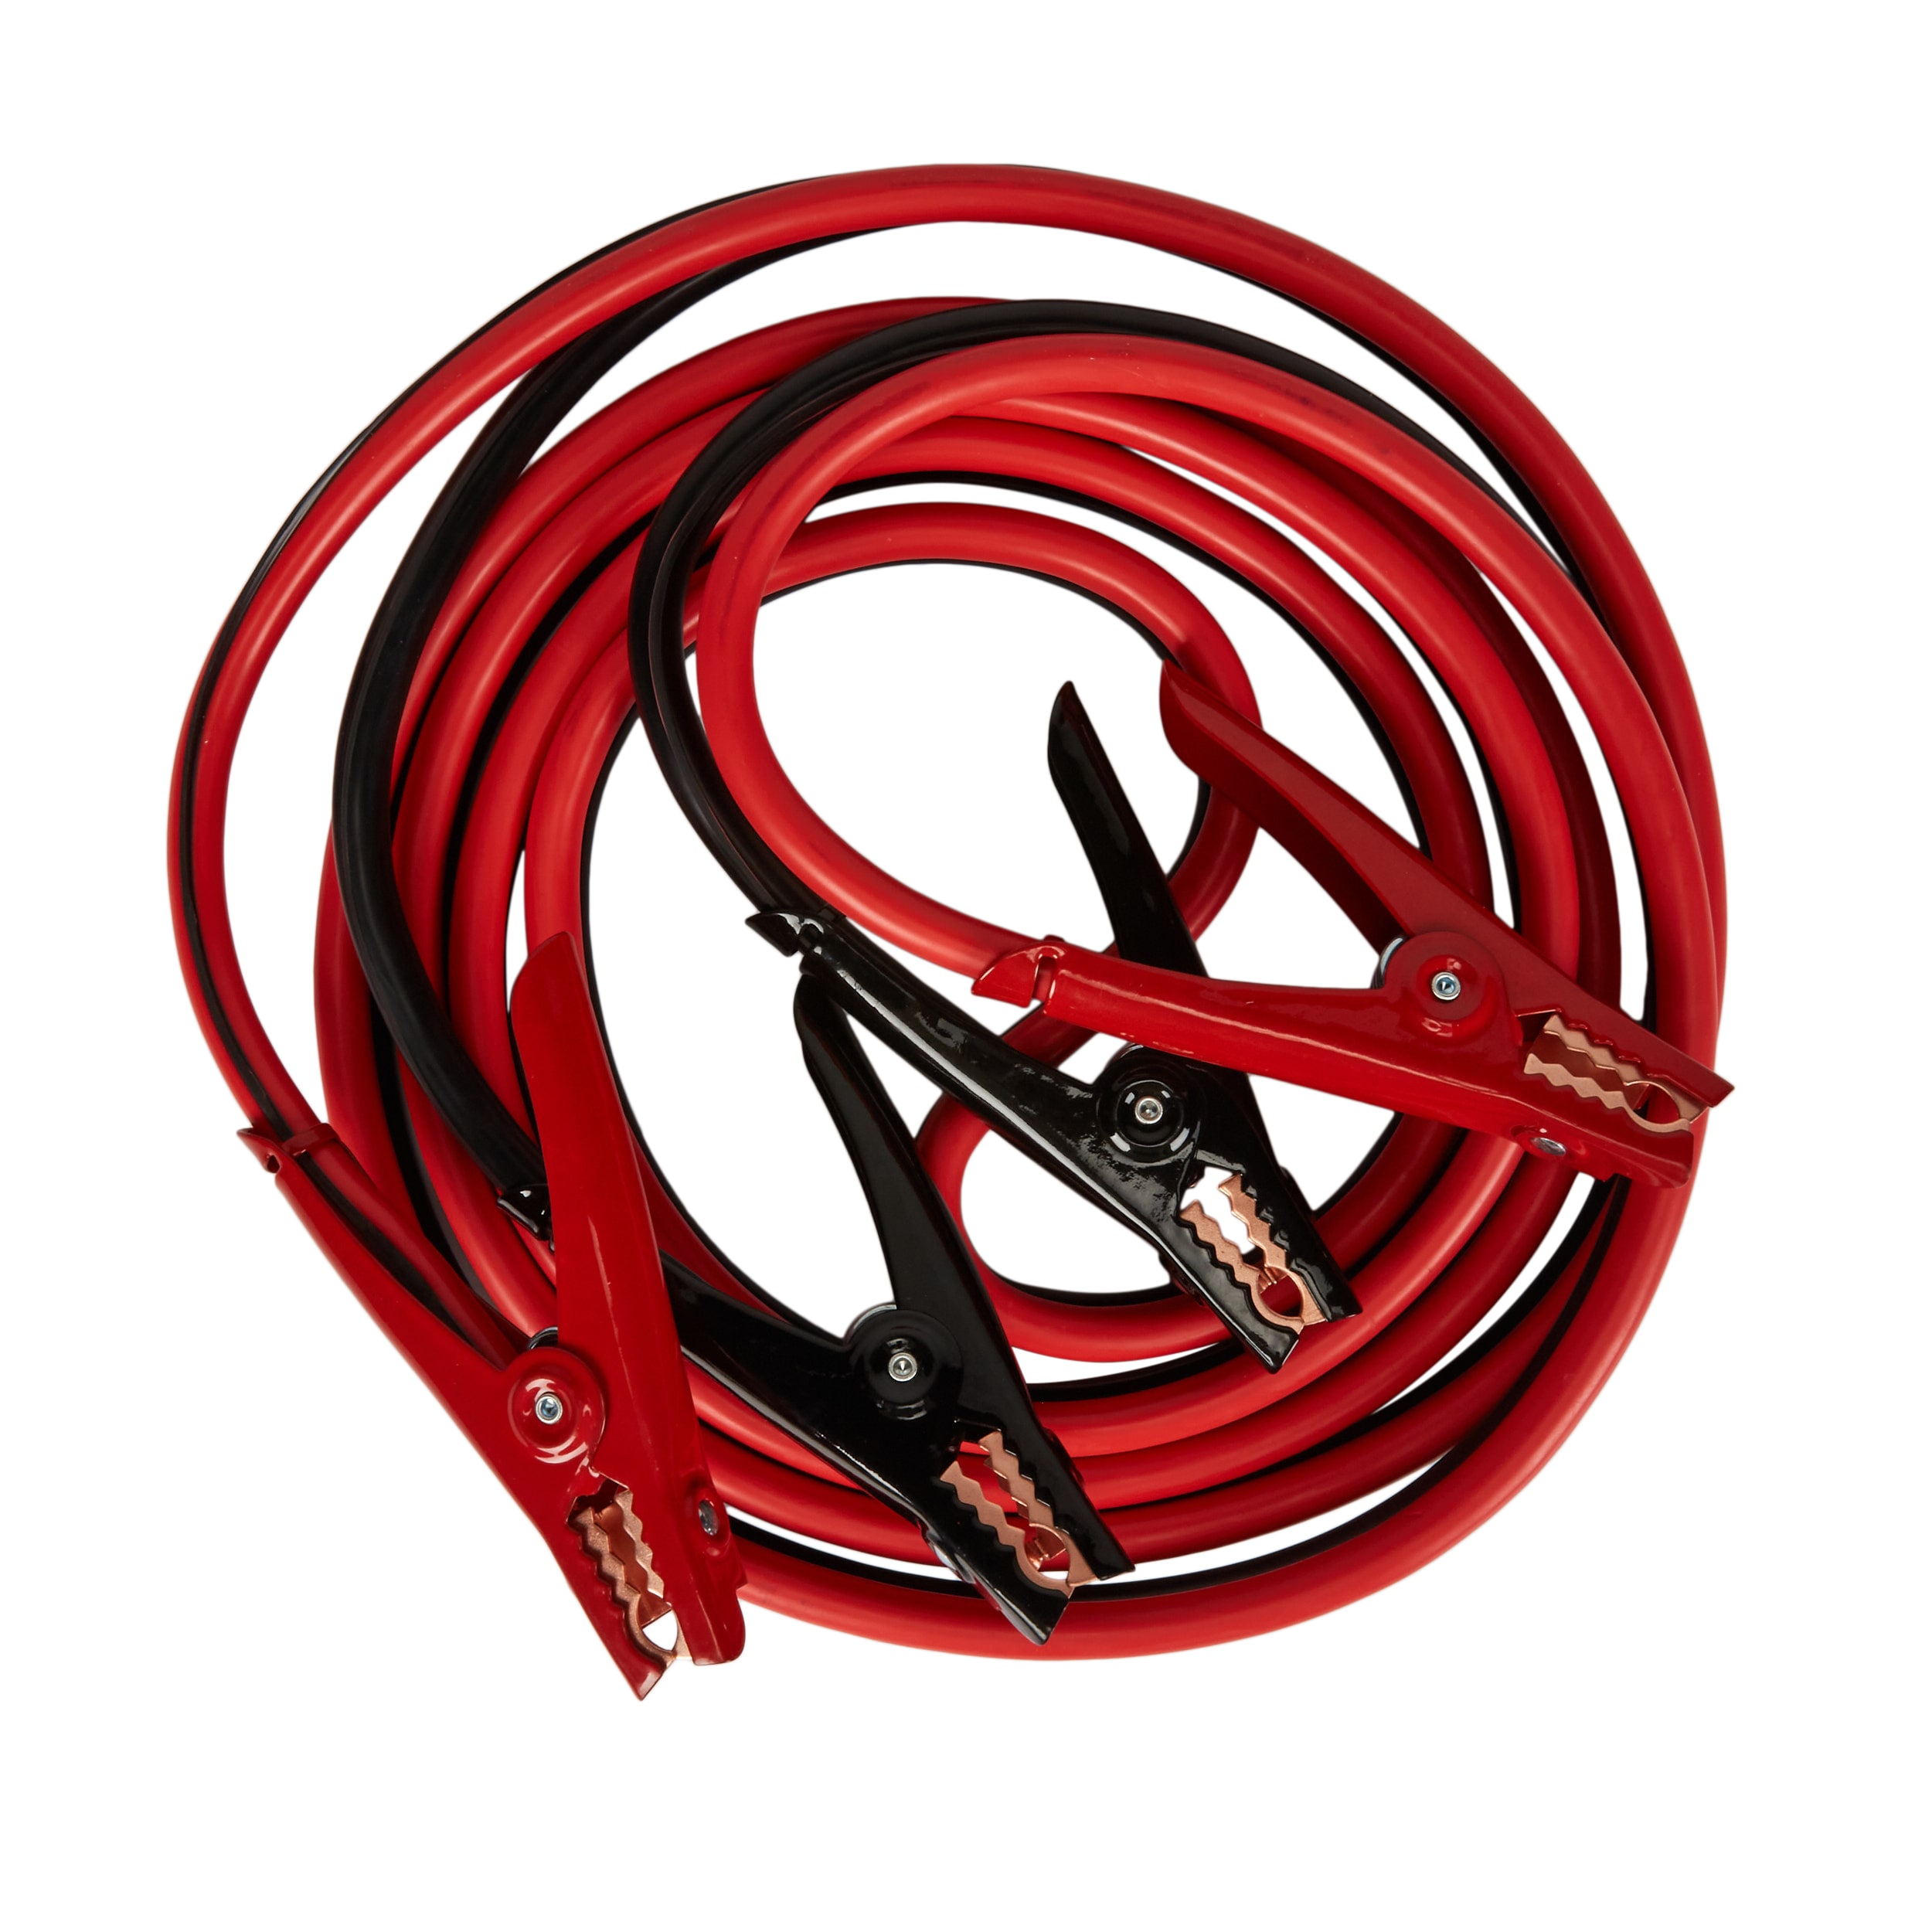 What Size Jumper Cables Do I Need? - 2 Vs. 4 Vs. 6 Gauge